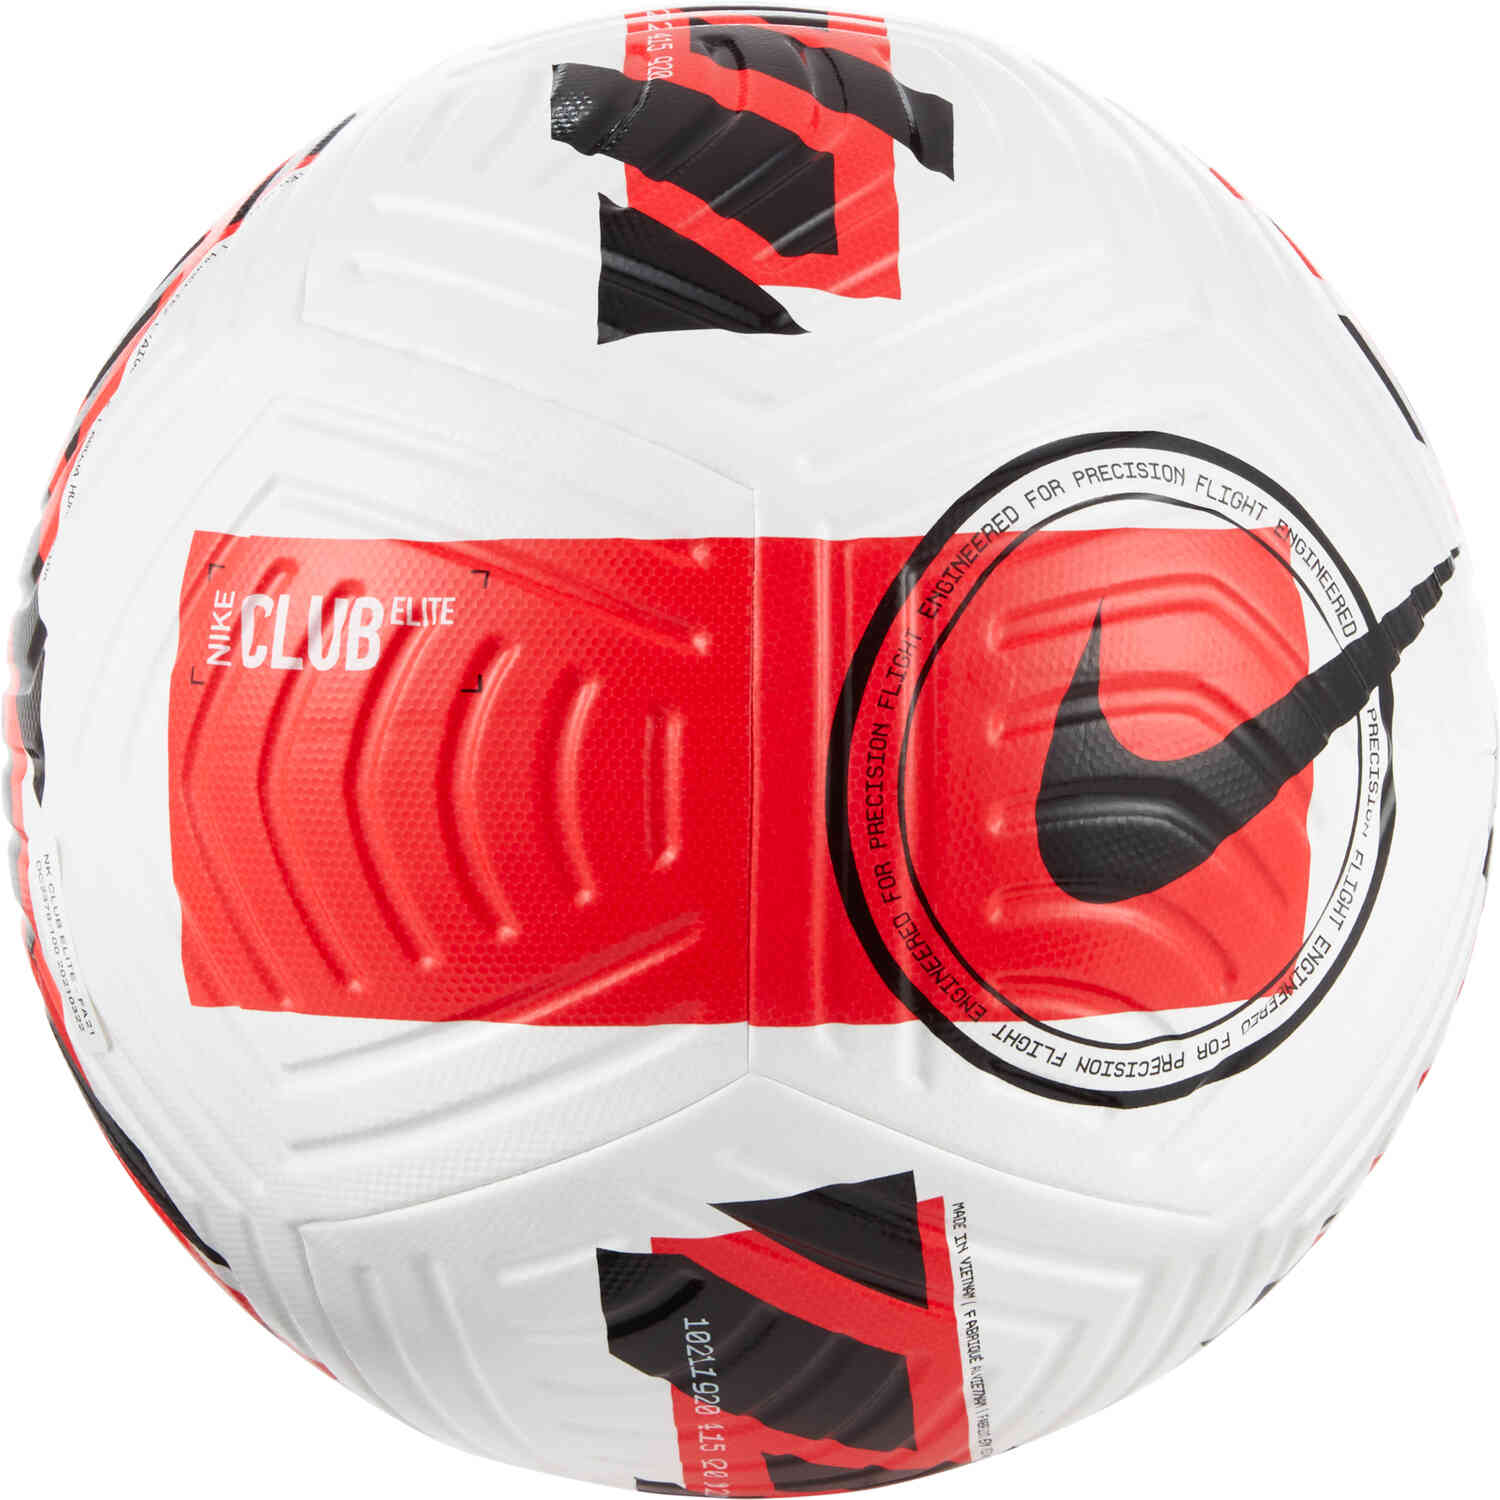 Nike Club Elite Match Soccer Ball White And Bright Crimson With Black